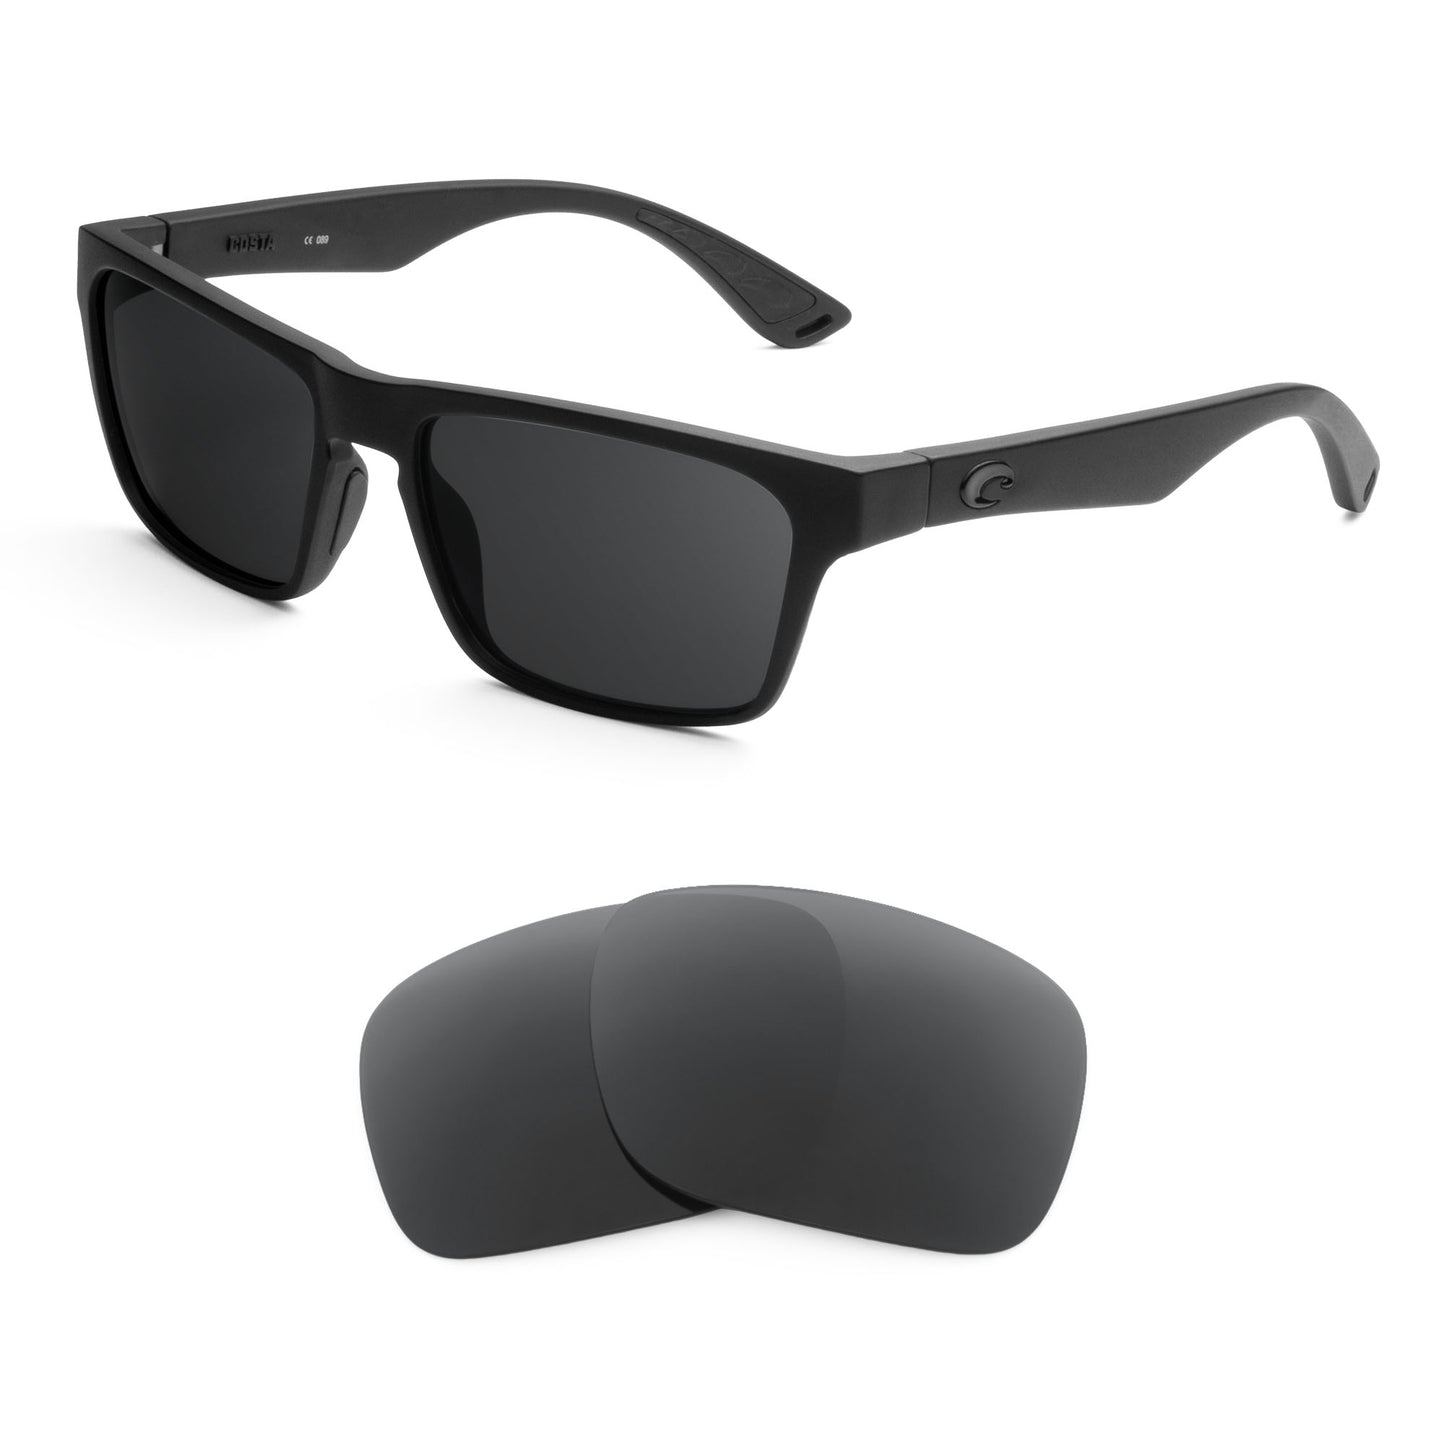 Costa Hinano sunglasses with replacement lenses